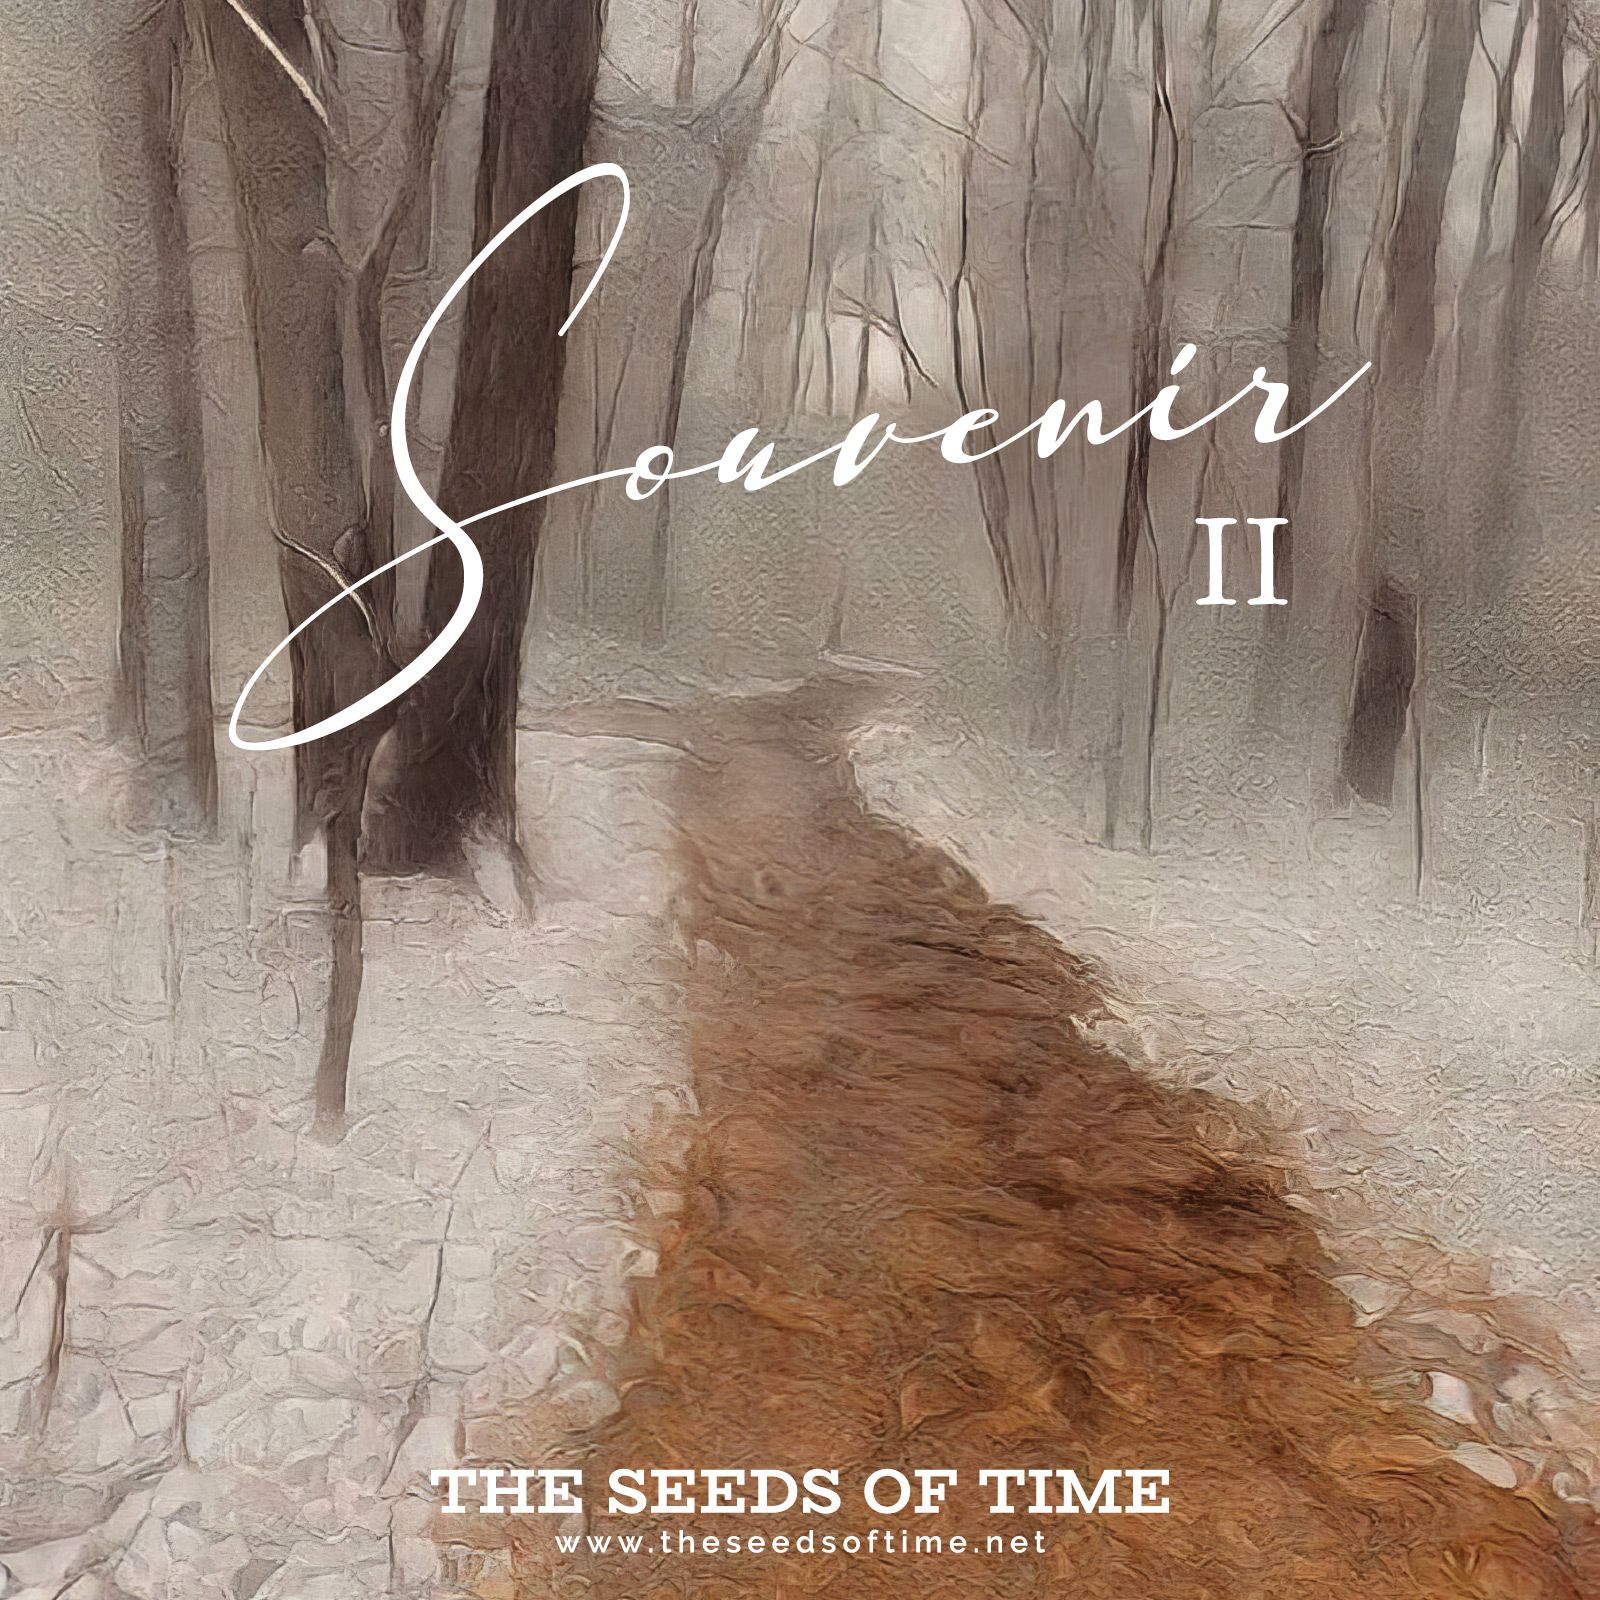 Track image for instrumental piano piece titled Souvenir 2 with an expressionist style artwork of a snowed in woodland where a path of soggy yellow leaves leads behind and around the naked trees